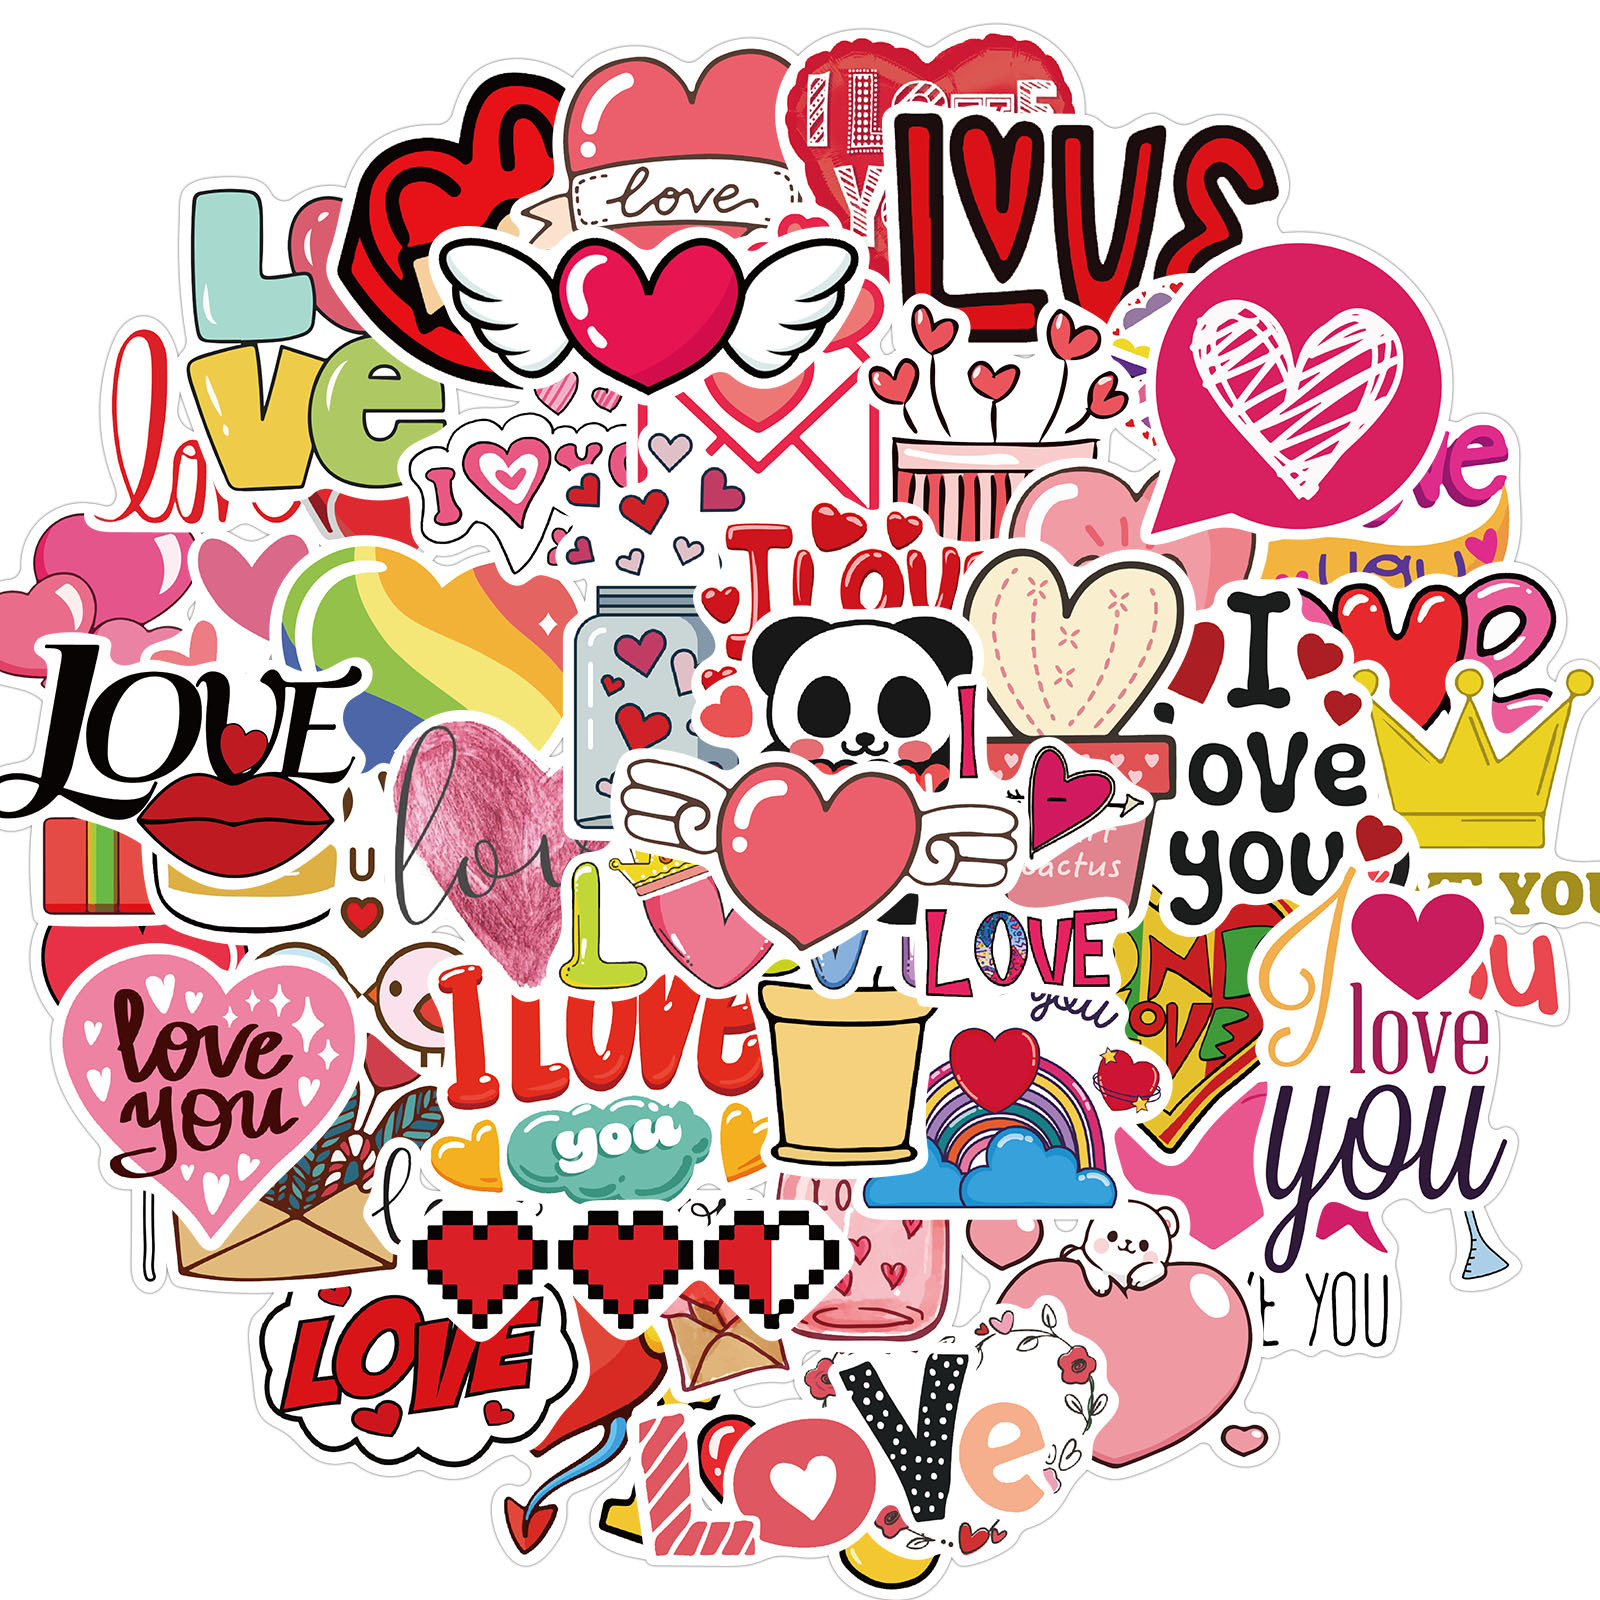  Love Stickers Pack Bulk  50pcs I Love You Relationship PVC  Vinyl Waterproof Sticker BFF for Envelopes Water Bottle Laptop Scrapbooking  Supplies for Adults Couple Family Bestfriend Girl Stickers Love 